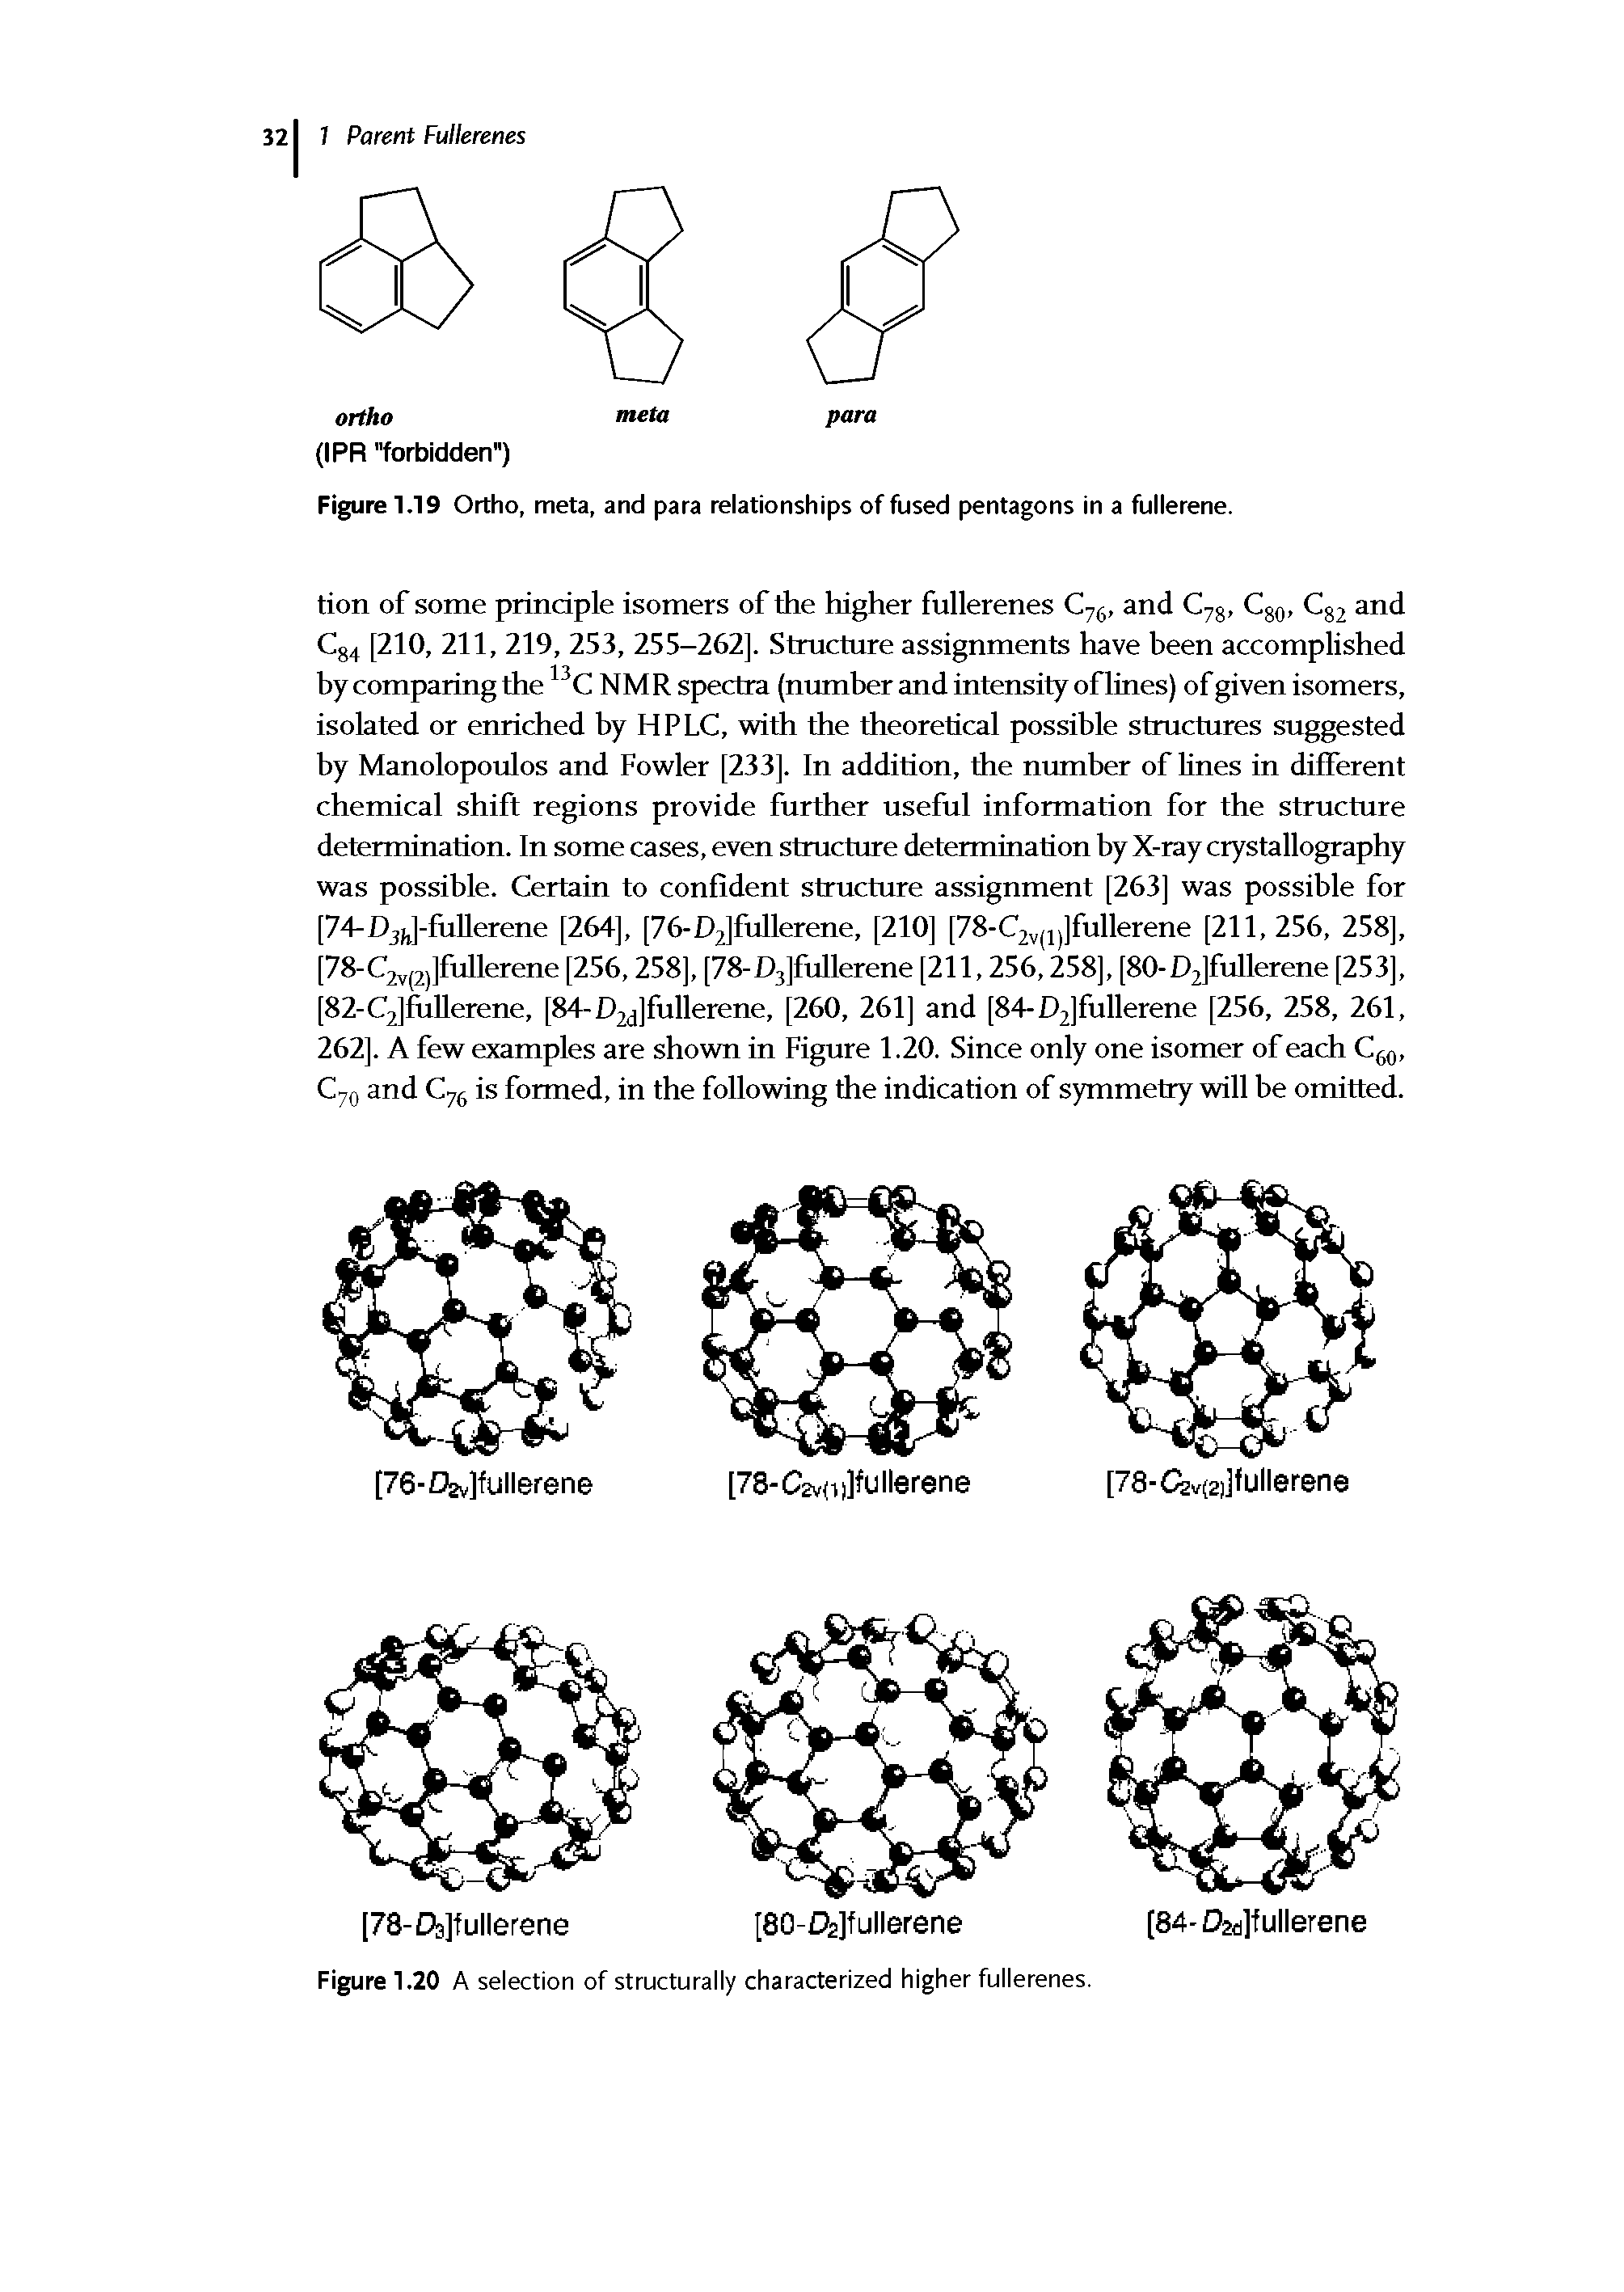 Figure 1.20 A selection of structurally characterized higher fullerenes.